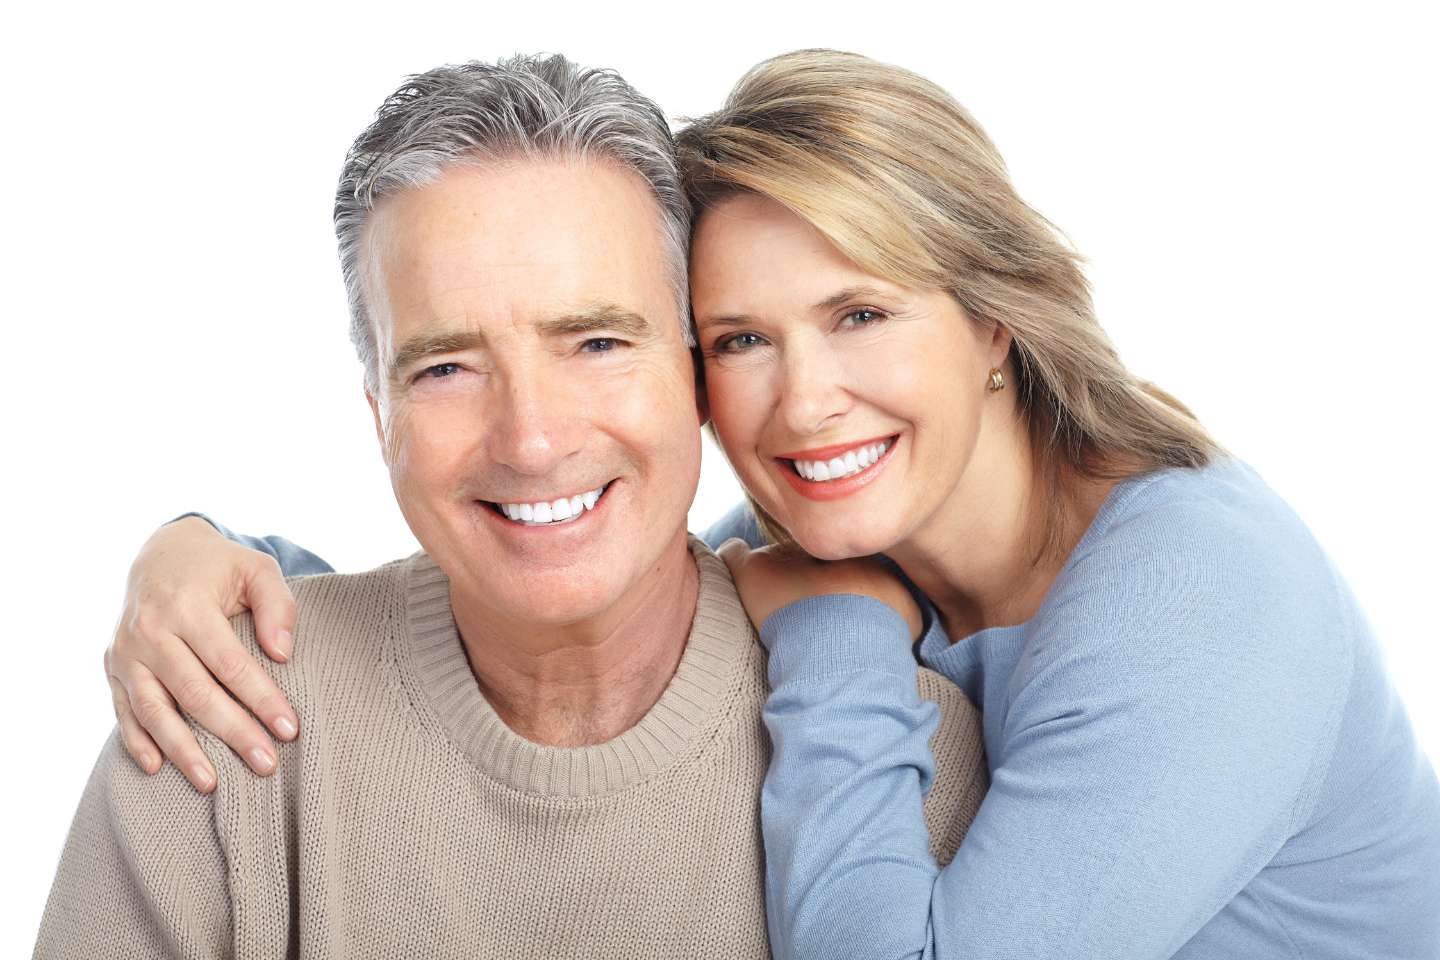 How Dental Implants Can Help You Rediscover Your Smile